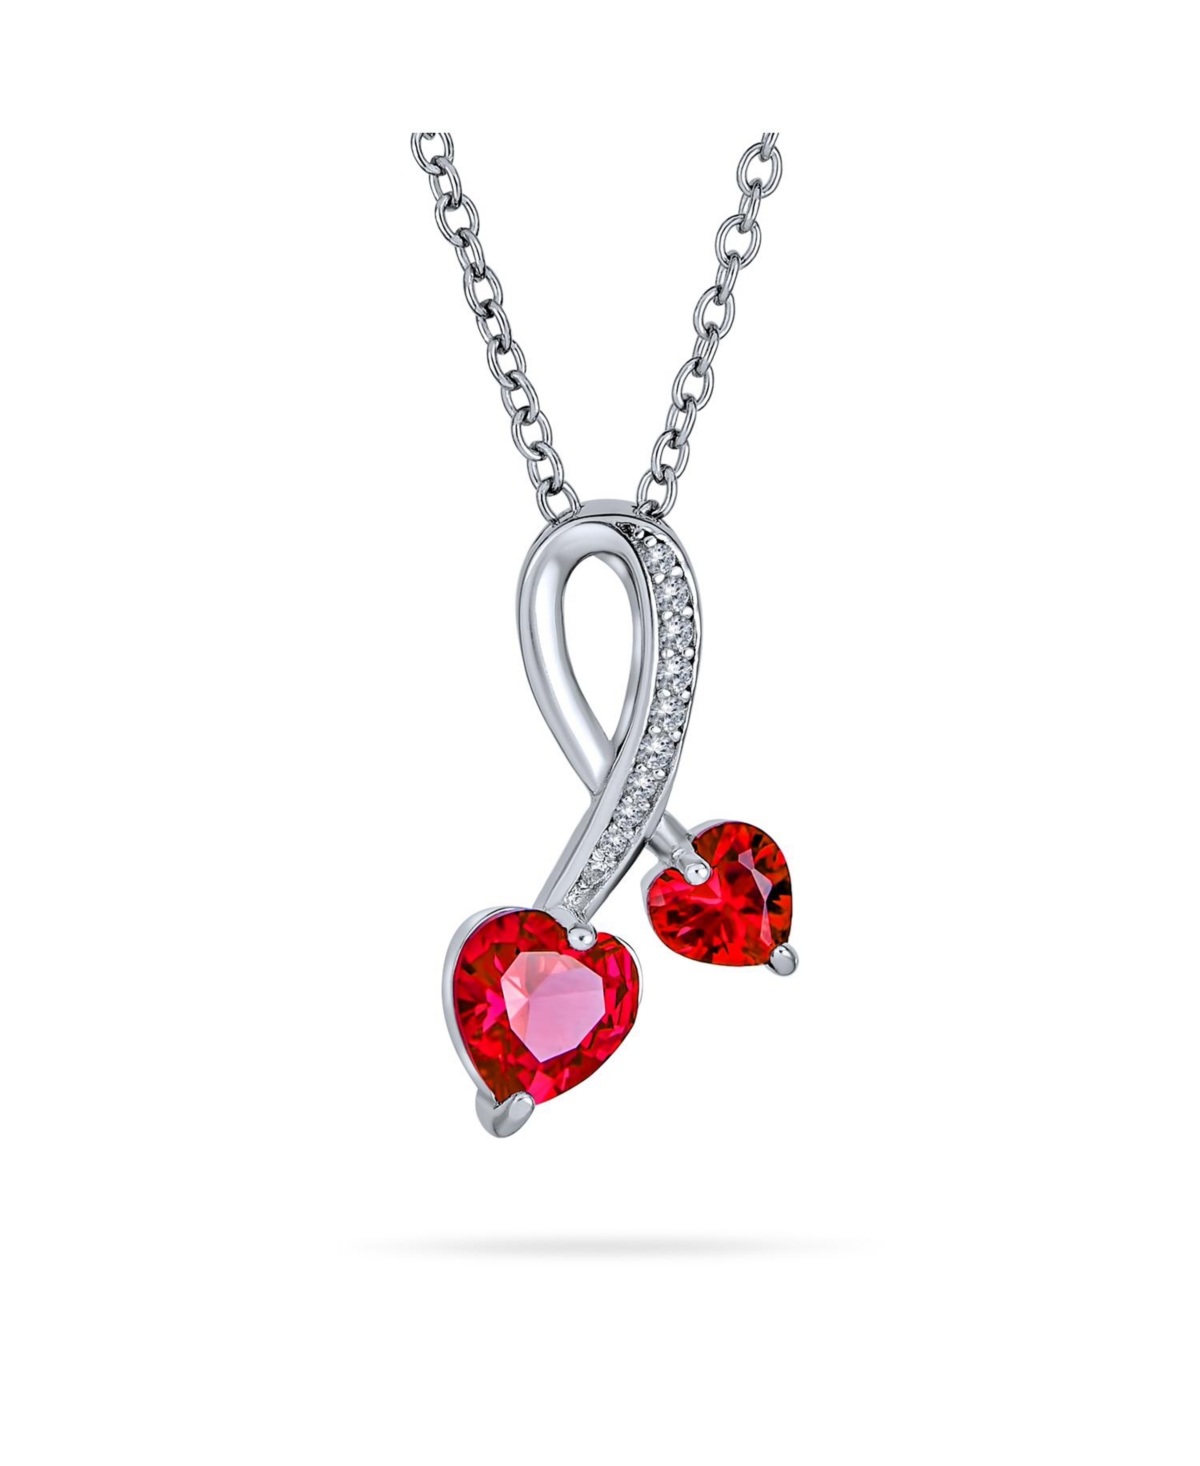 Romantic Promise Pave Accented Criss Crossing Twisting Two Ruby Red Aaa Cz Hearts Necklace Pendant For Women Teens .925 Sterling Silver - Red jul